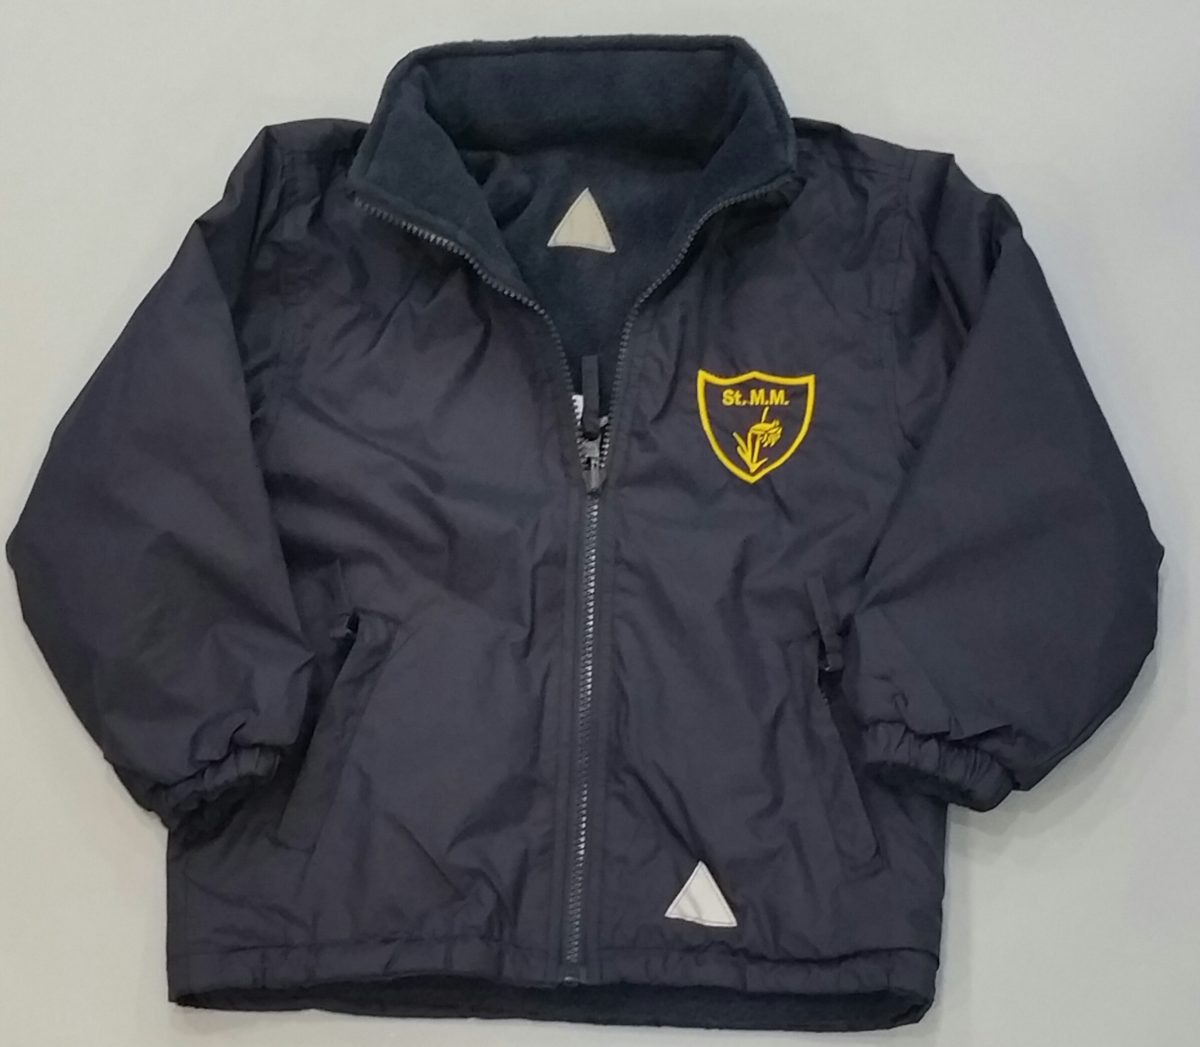 NAVY BLUE REVERSIBLE JACKET with embroidered school